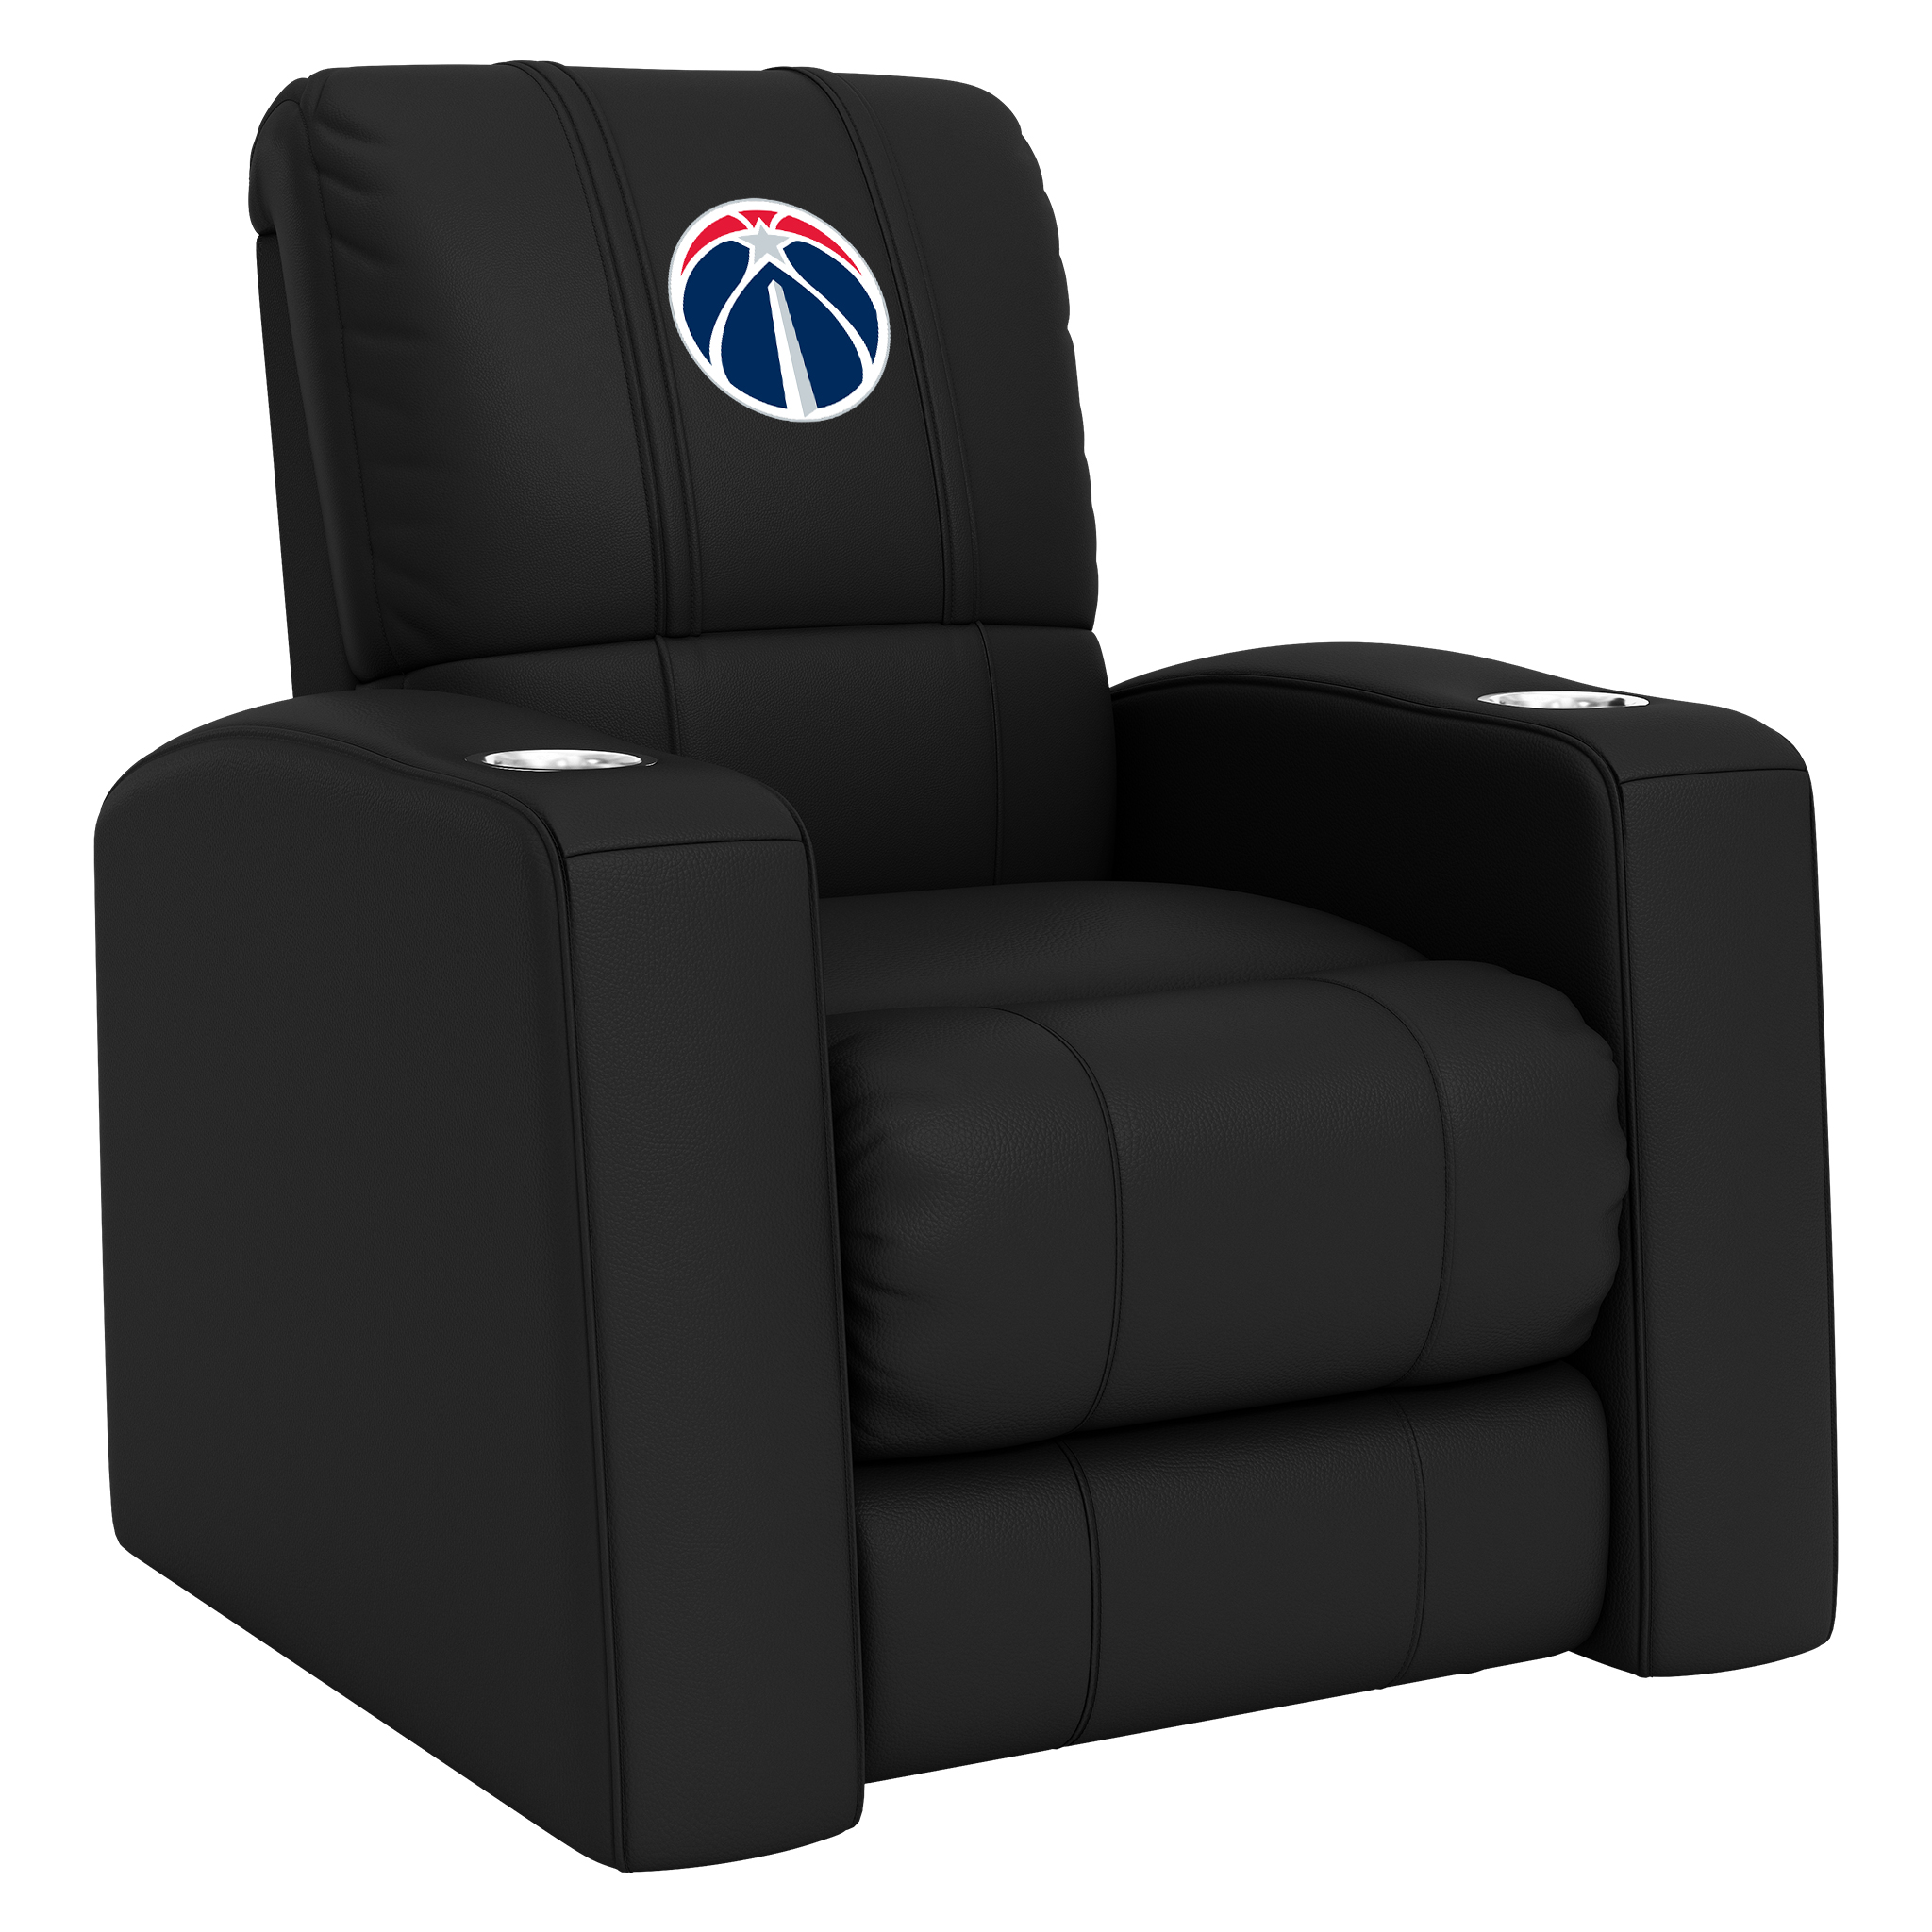 Washington Wizards Home Theater Recliner with Washington Wizards Primary Logo